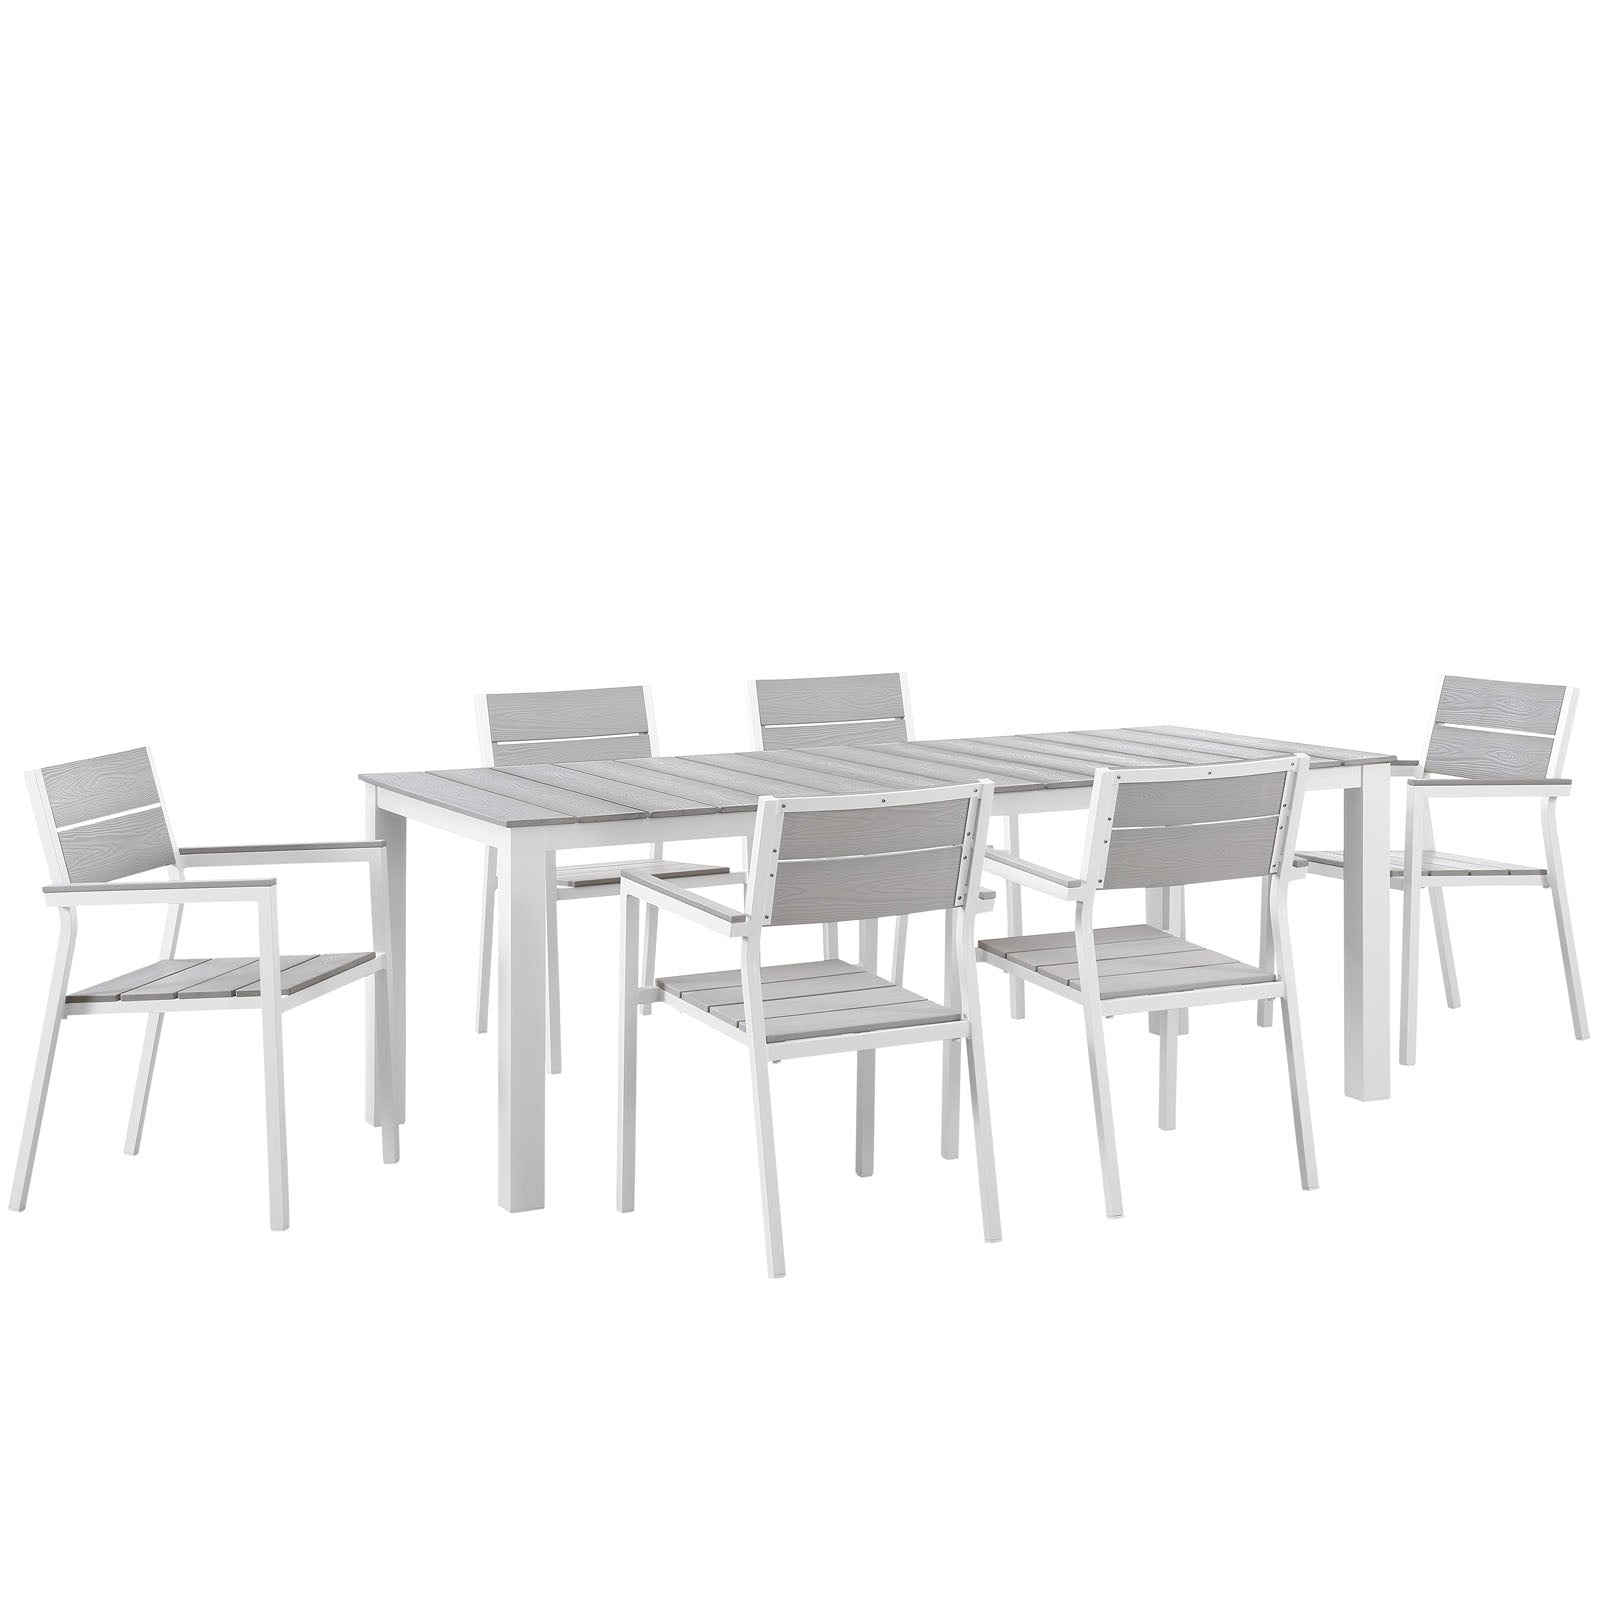 Modway Outdoor Dining Sets - Maine 7 Piece Outdoor Patio Dining Set White Light Gray